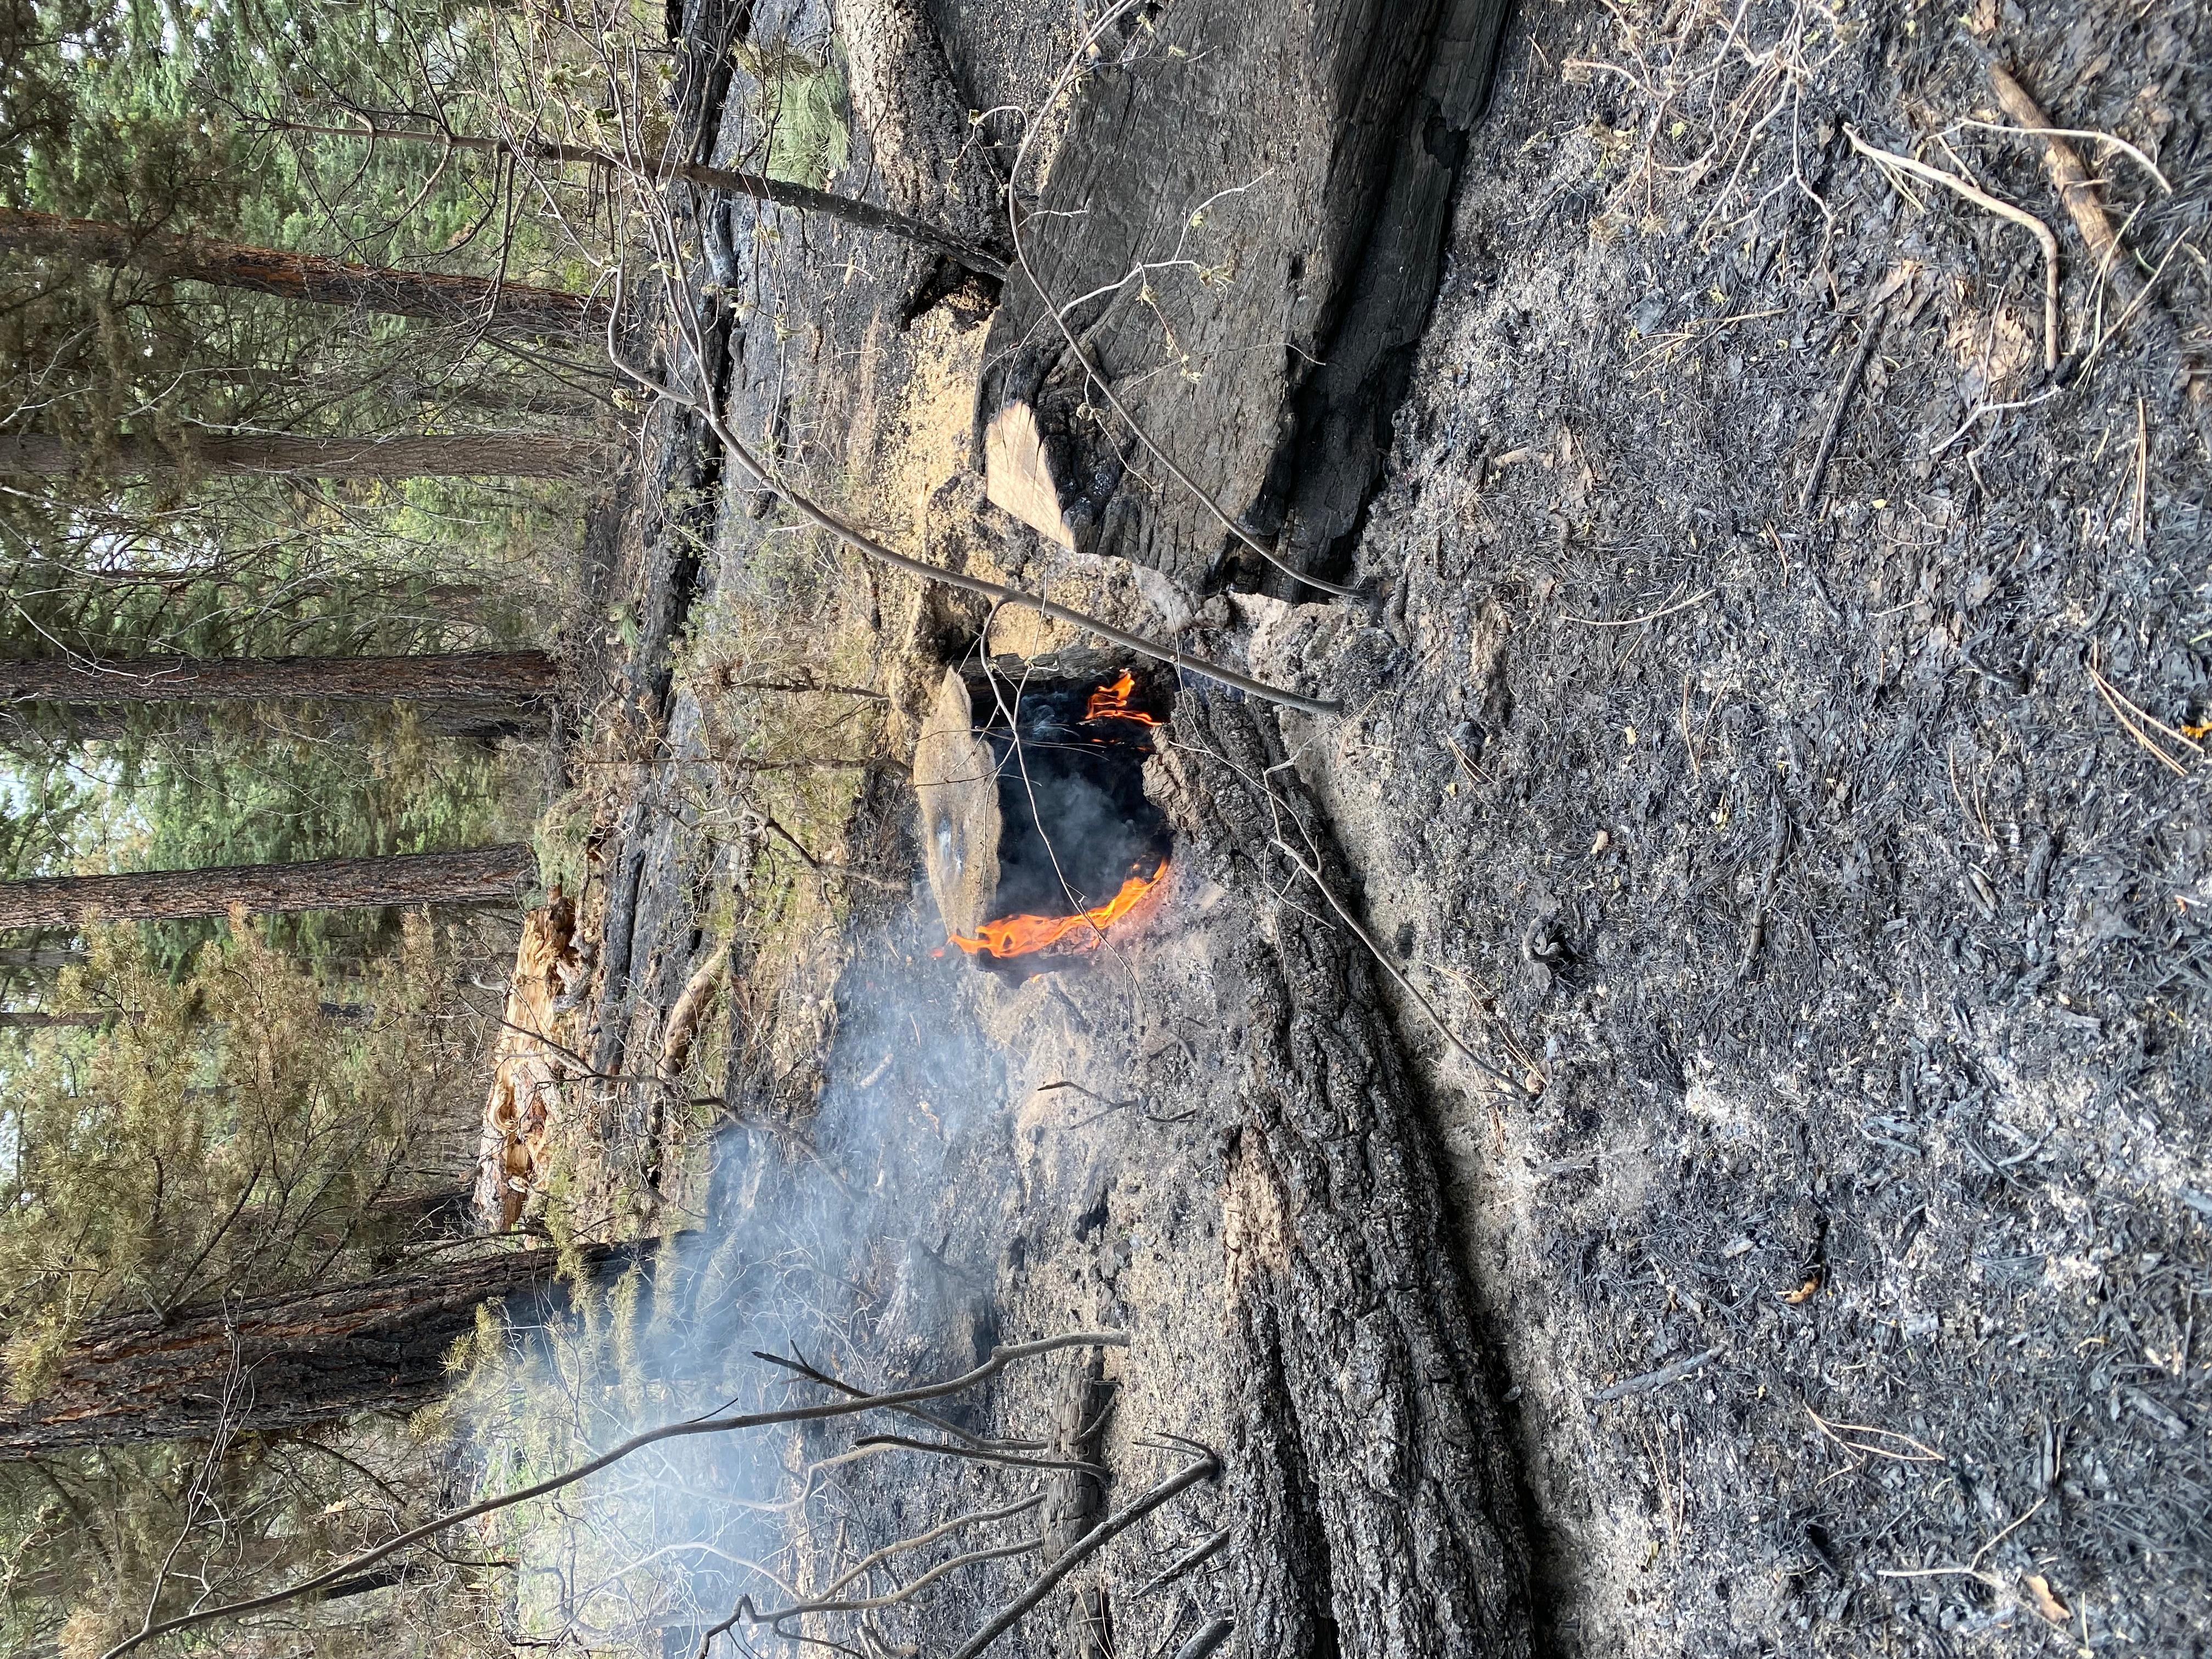 A cut-off stump burns inside the Plumtaw Fire. In the background, unburned trees line the fire perimeter.